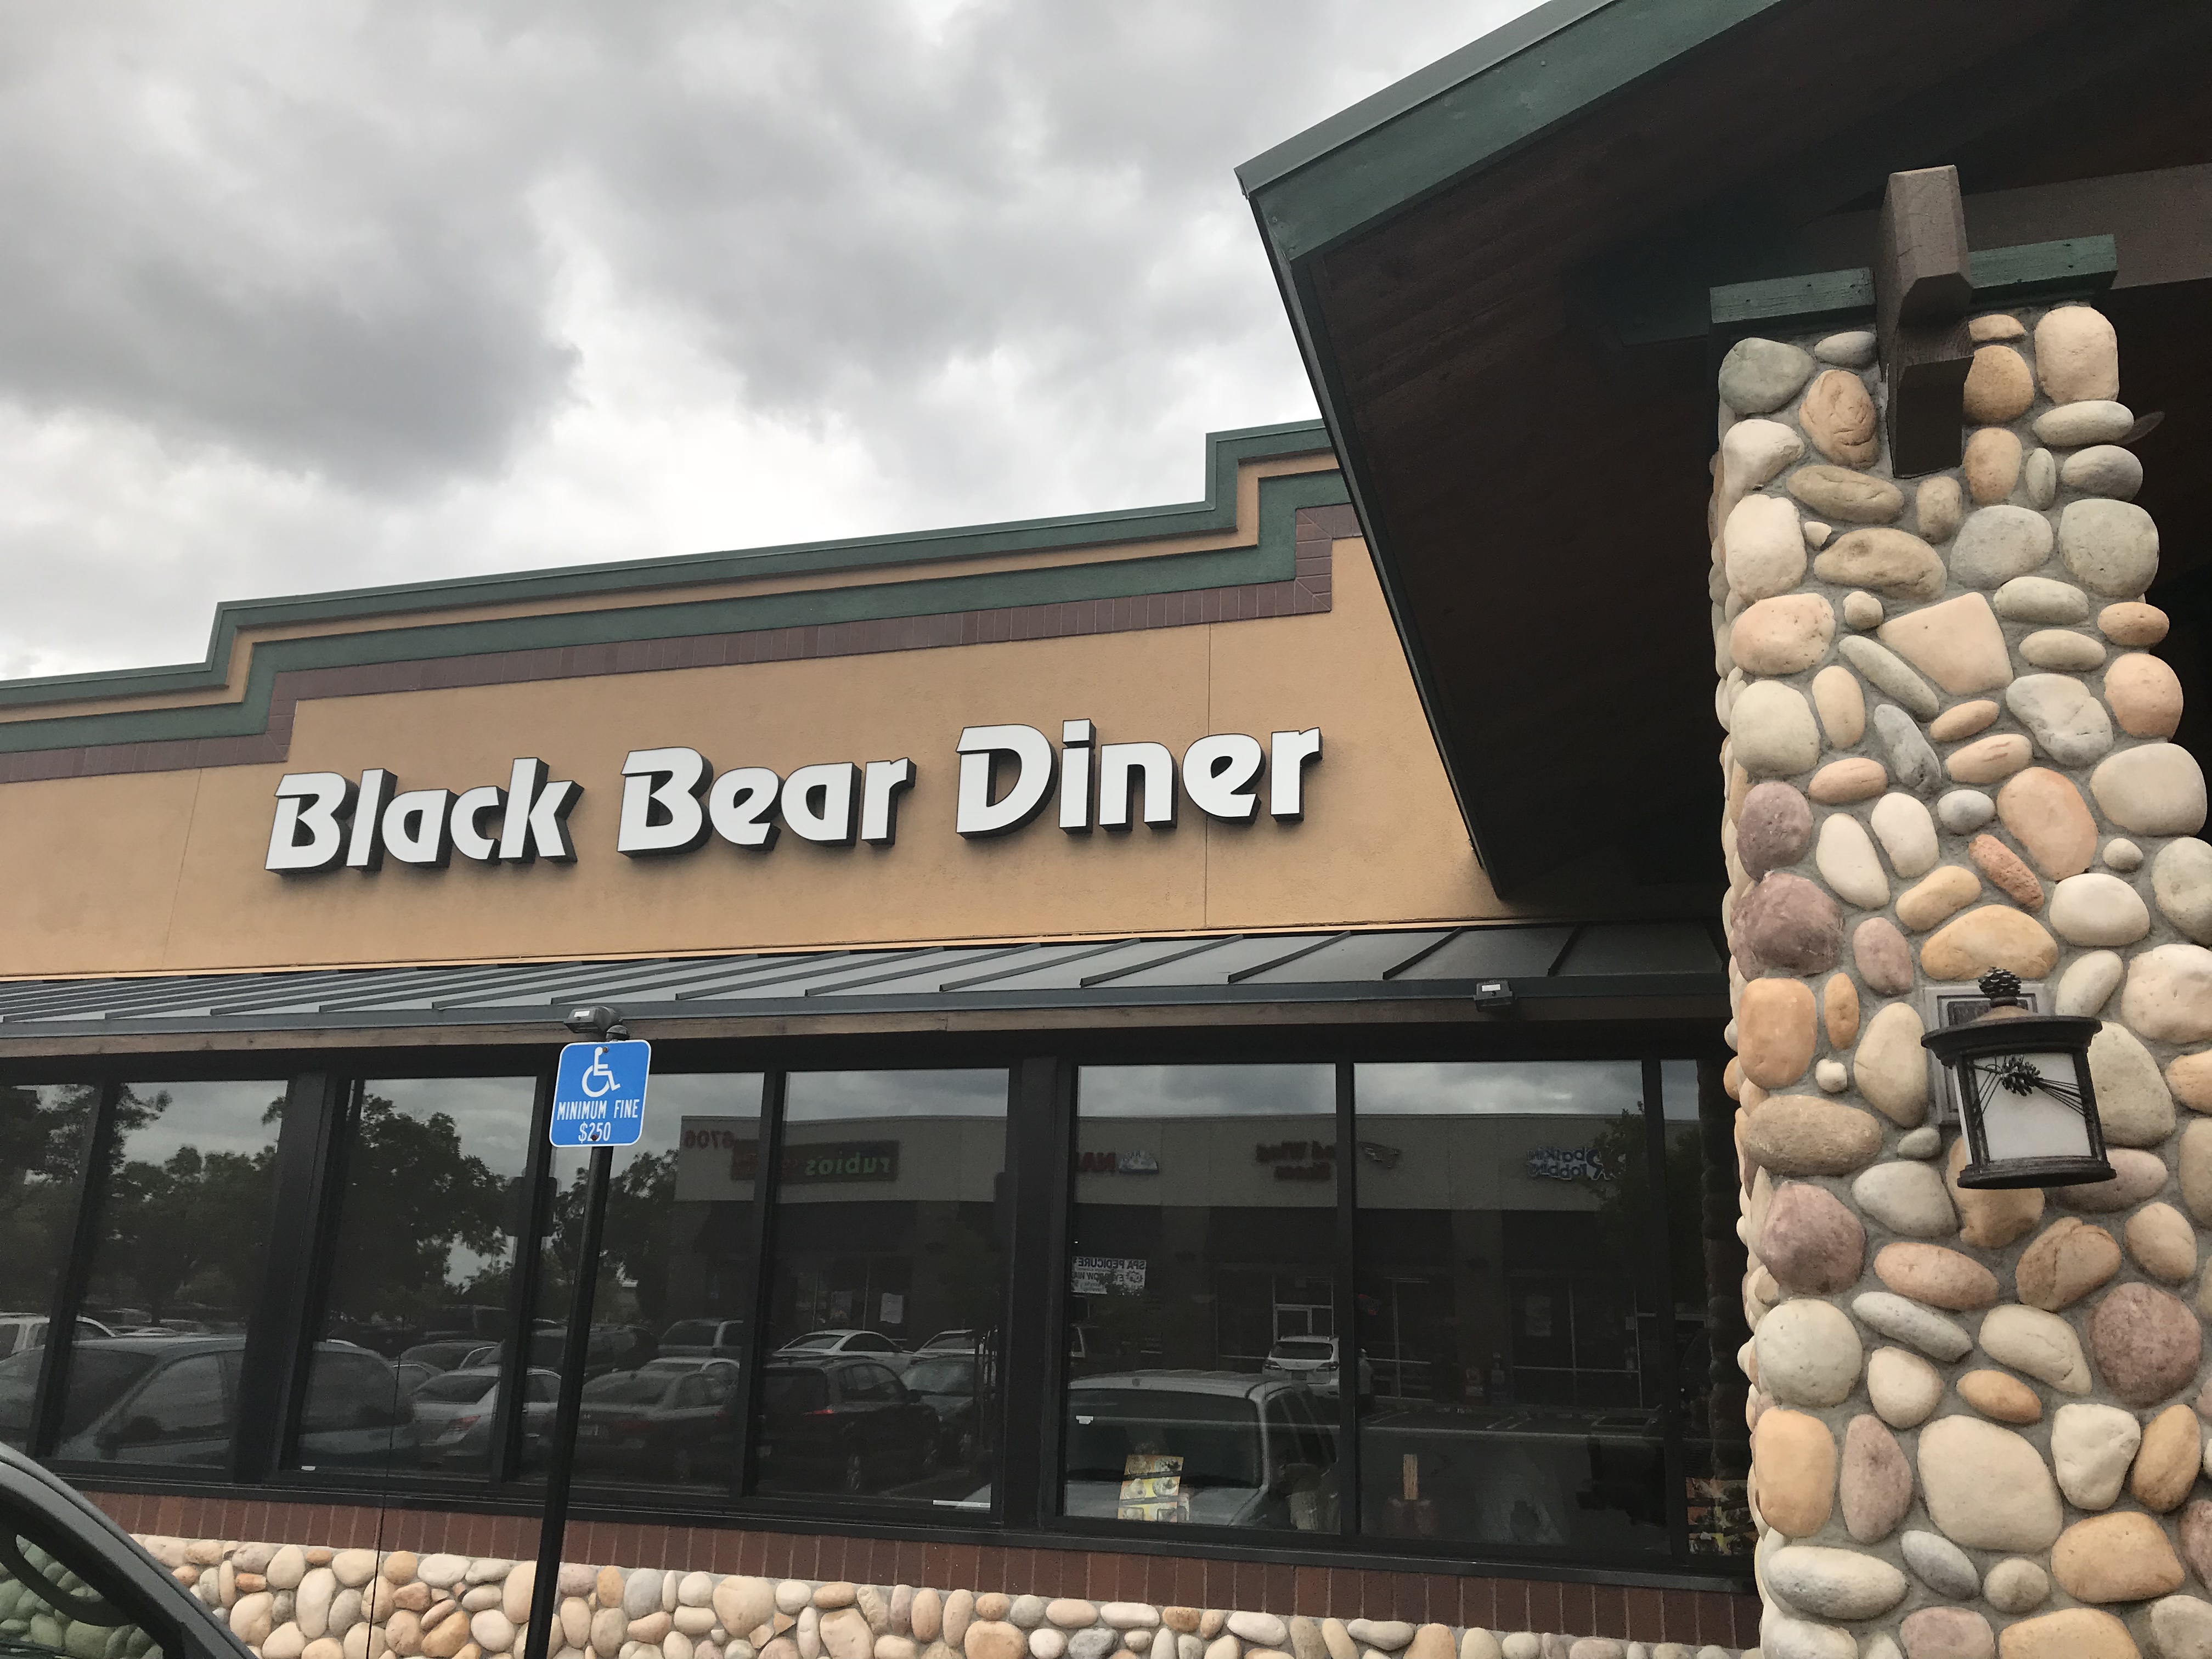 black bear diner closest to my location